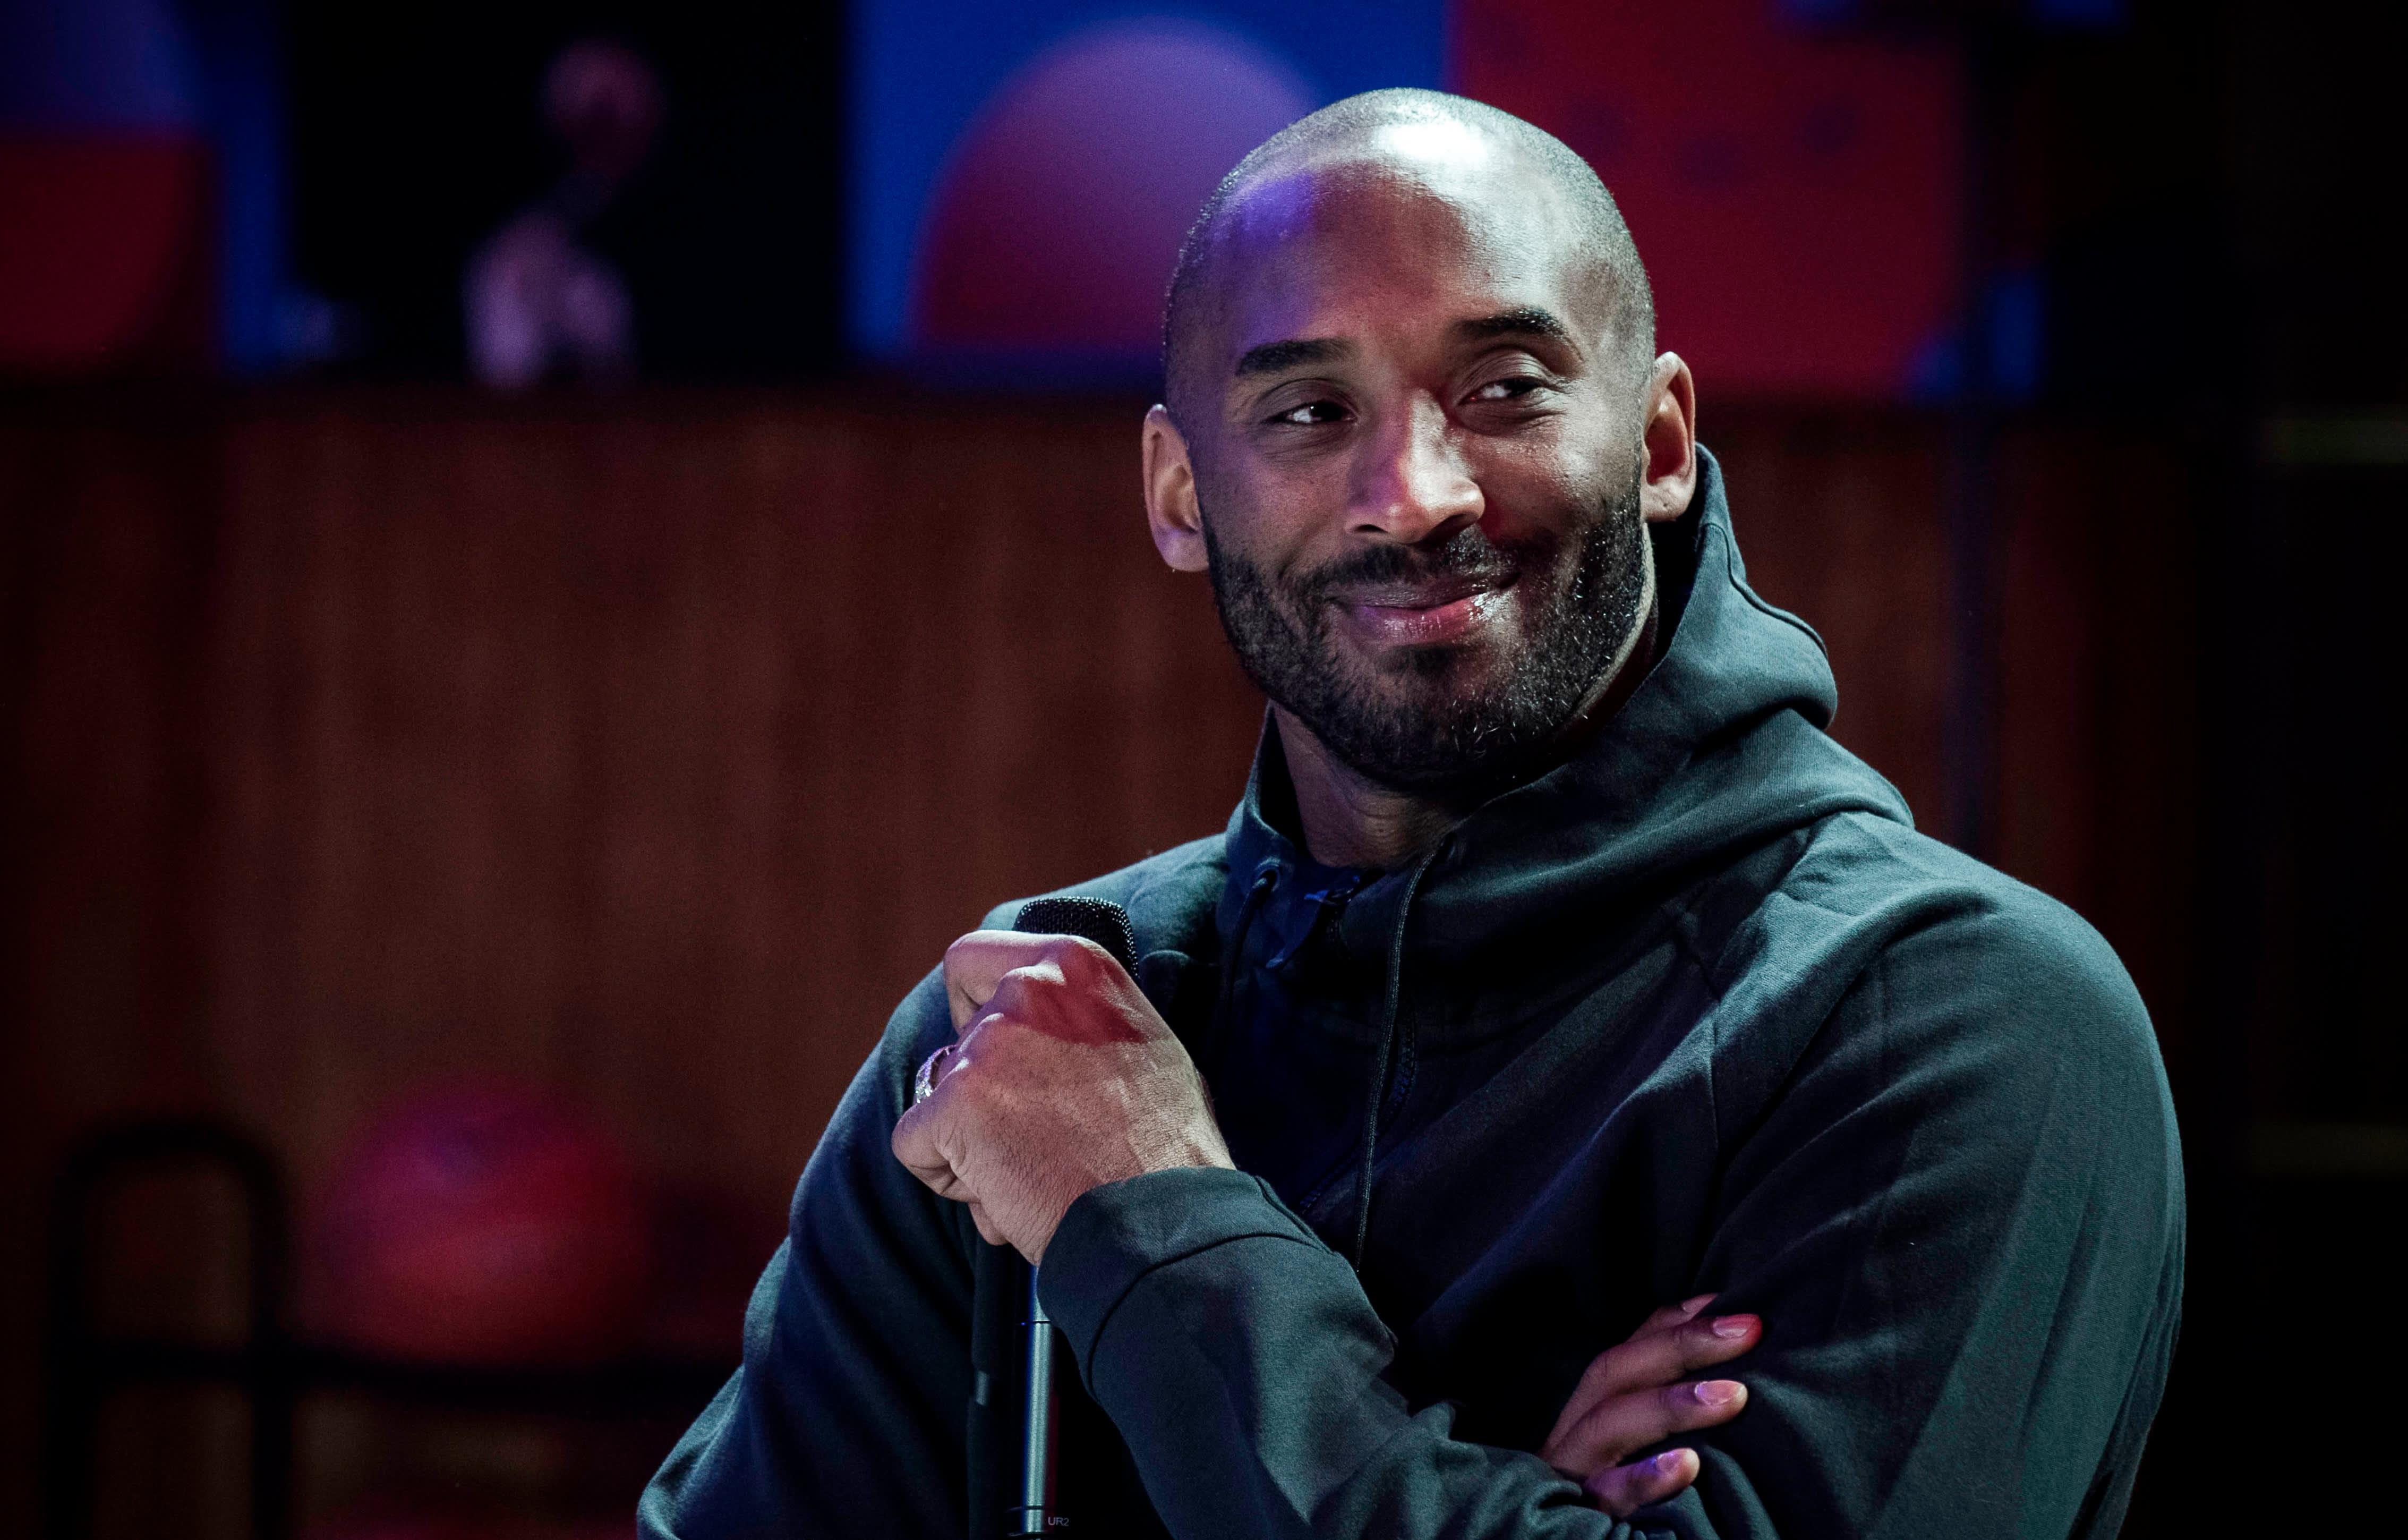 Kobe Bryant's Hall of Fame legacy includes his Olympic excellence